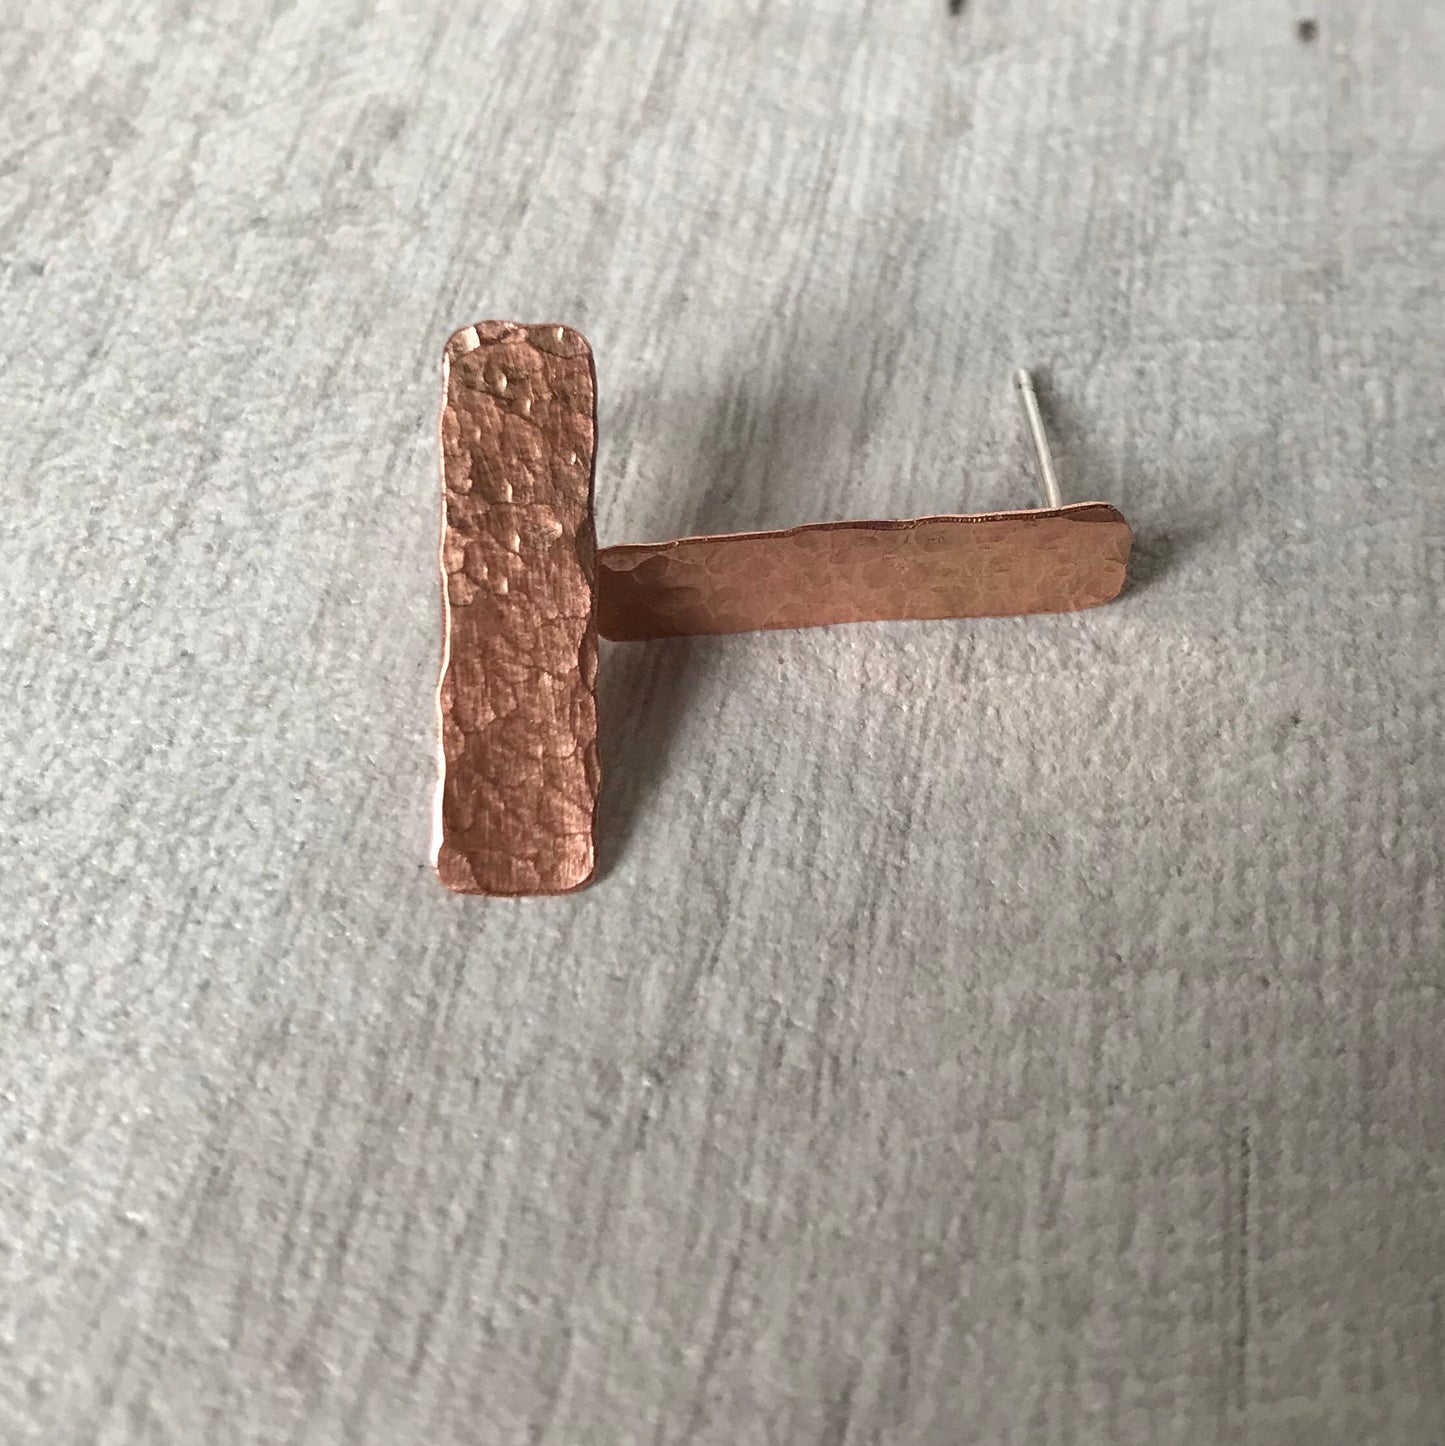 Long hammered copper stud earring